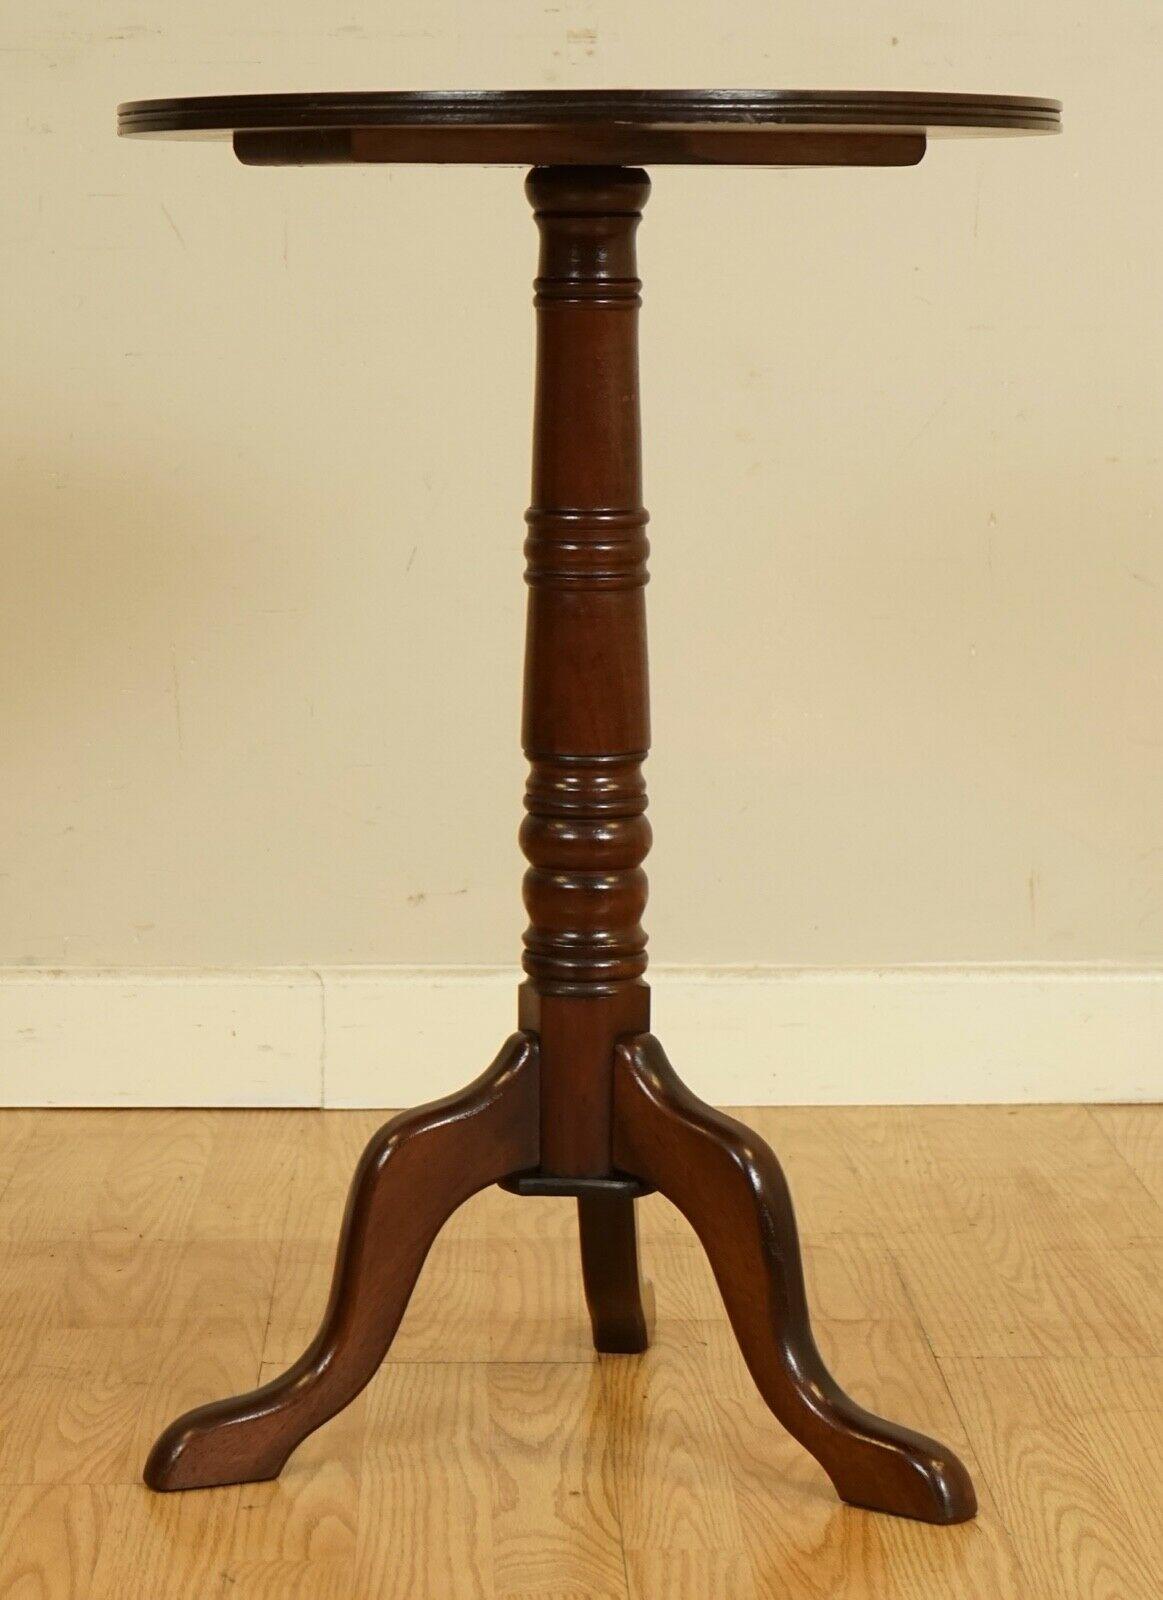 We are delighted to sell this lovely mahogany victorian side table.

In a very good condition, very solid and sturdy.

We have lightly restored this by giving it a hand clean all over, wax and hand polish. 

Please view our pictures as they